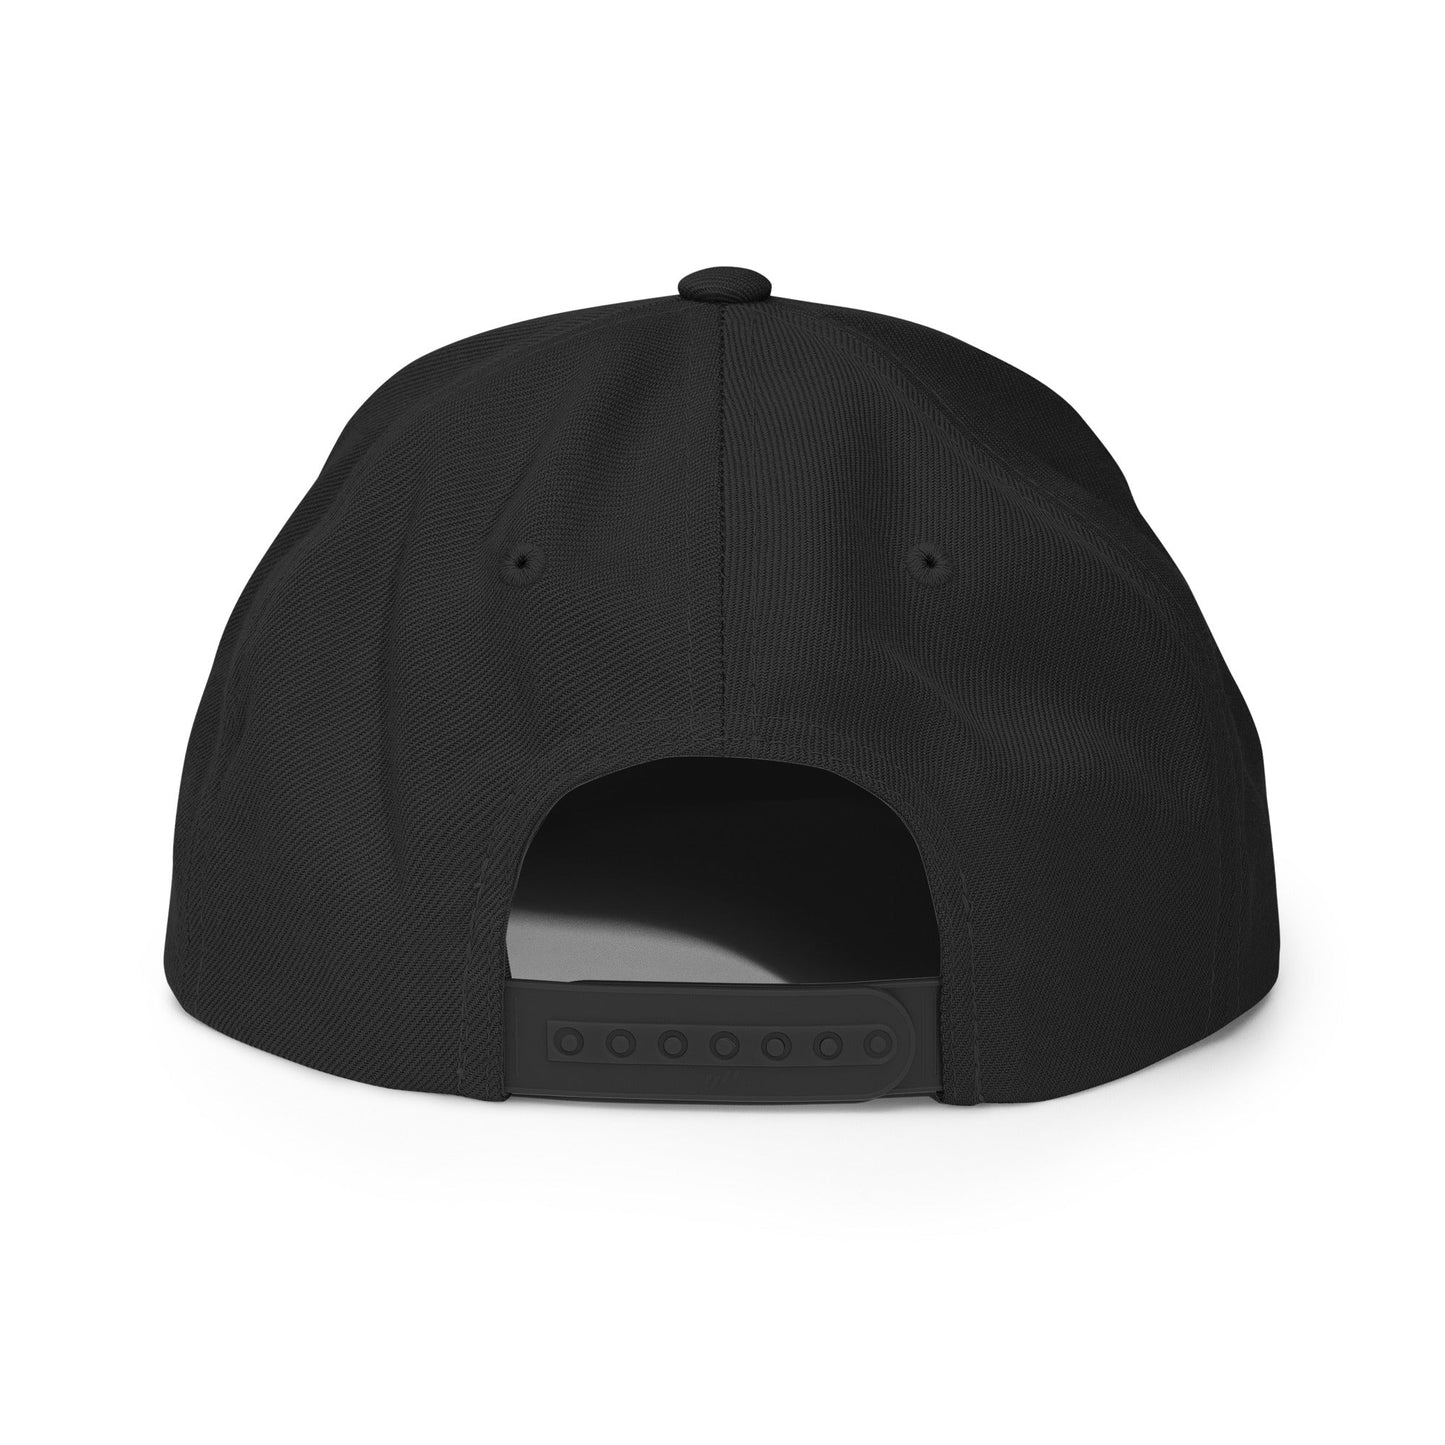 Gear 5 Embroidered Unisex Anime Snap Back Hat